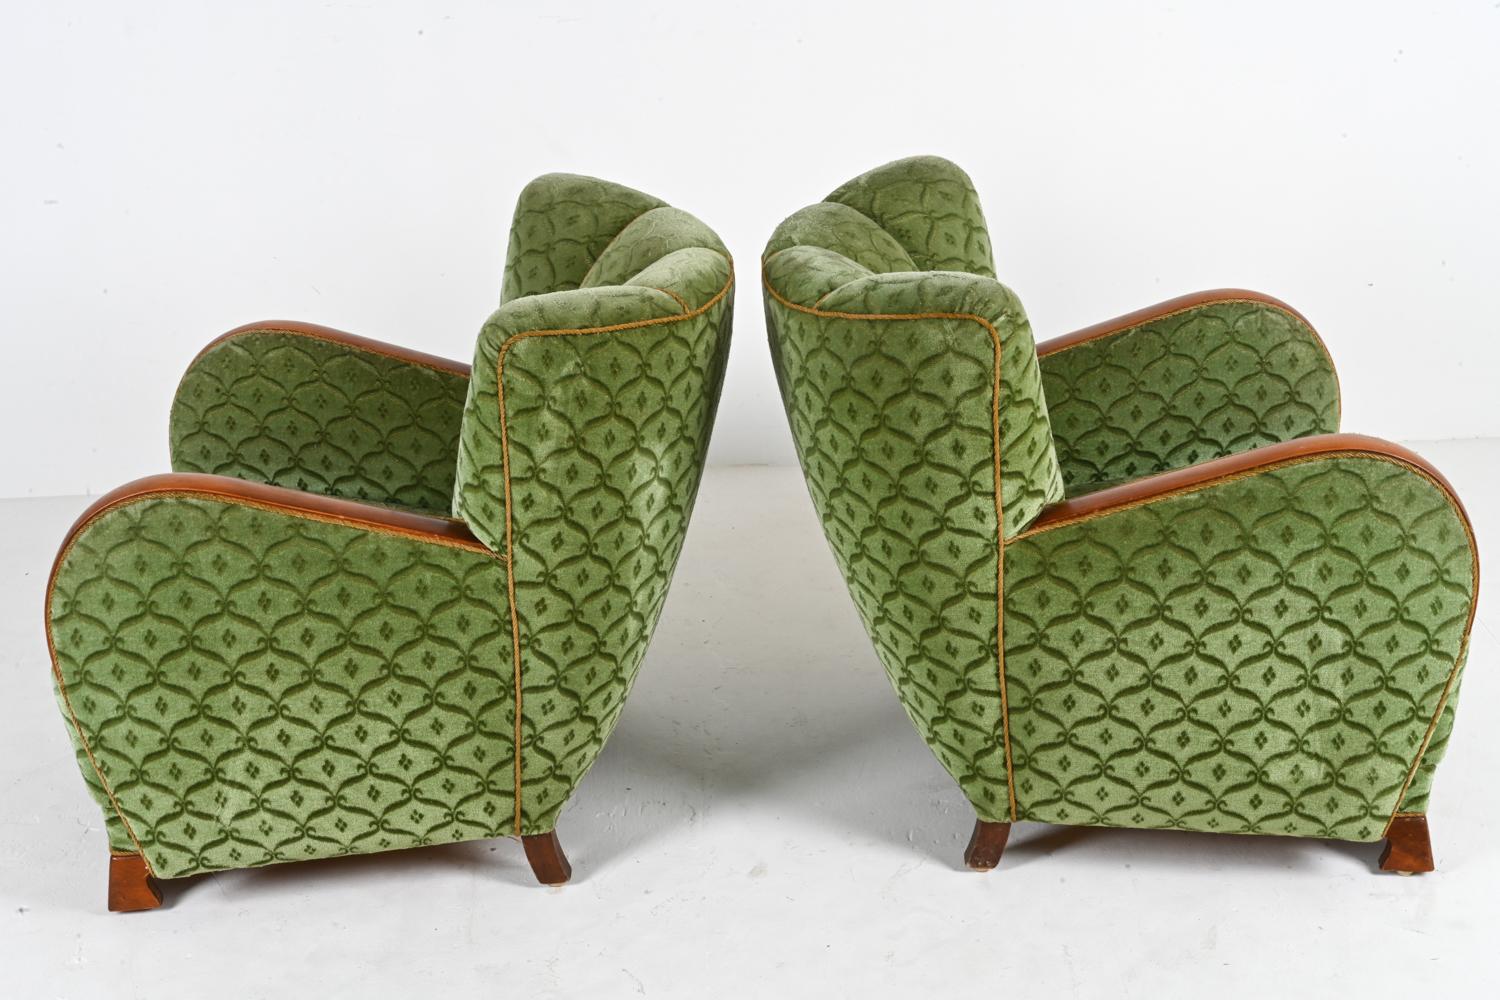 Pair of Mogens Lassen Style Danish Midcentury Lounge or Club Chairs, 1940s For Sale 5